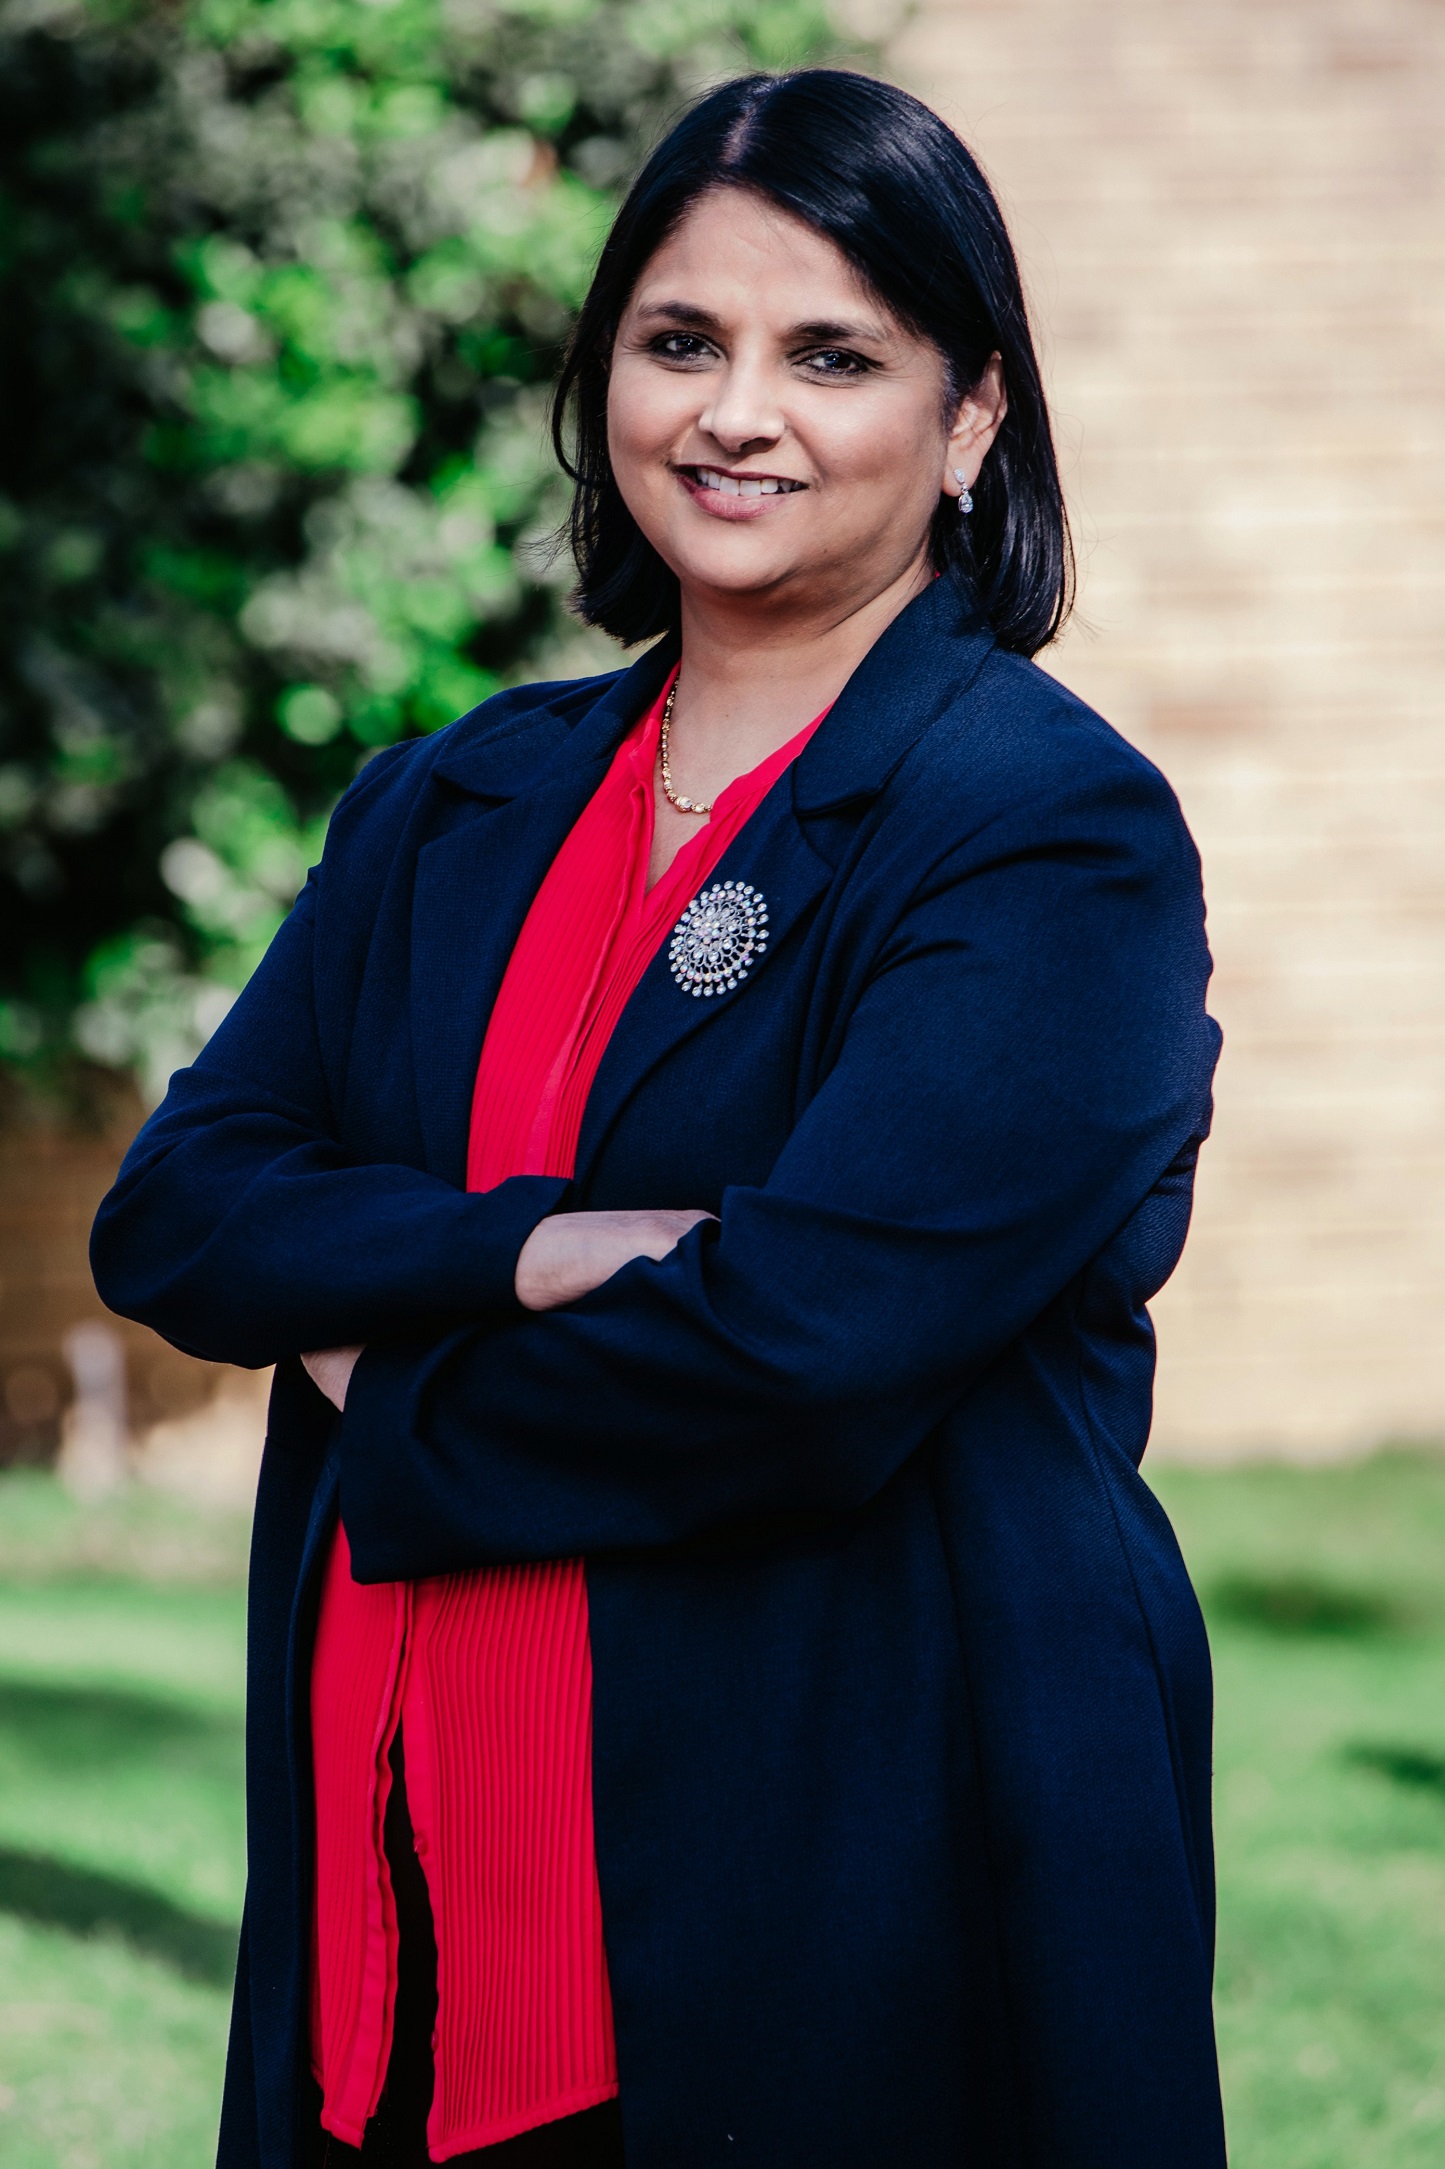 Groote Schuur Hospital CEO, Dr Bhavna Patel, retires after 23 years.